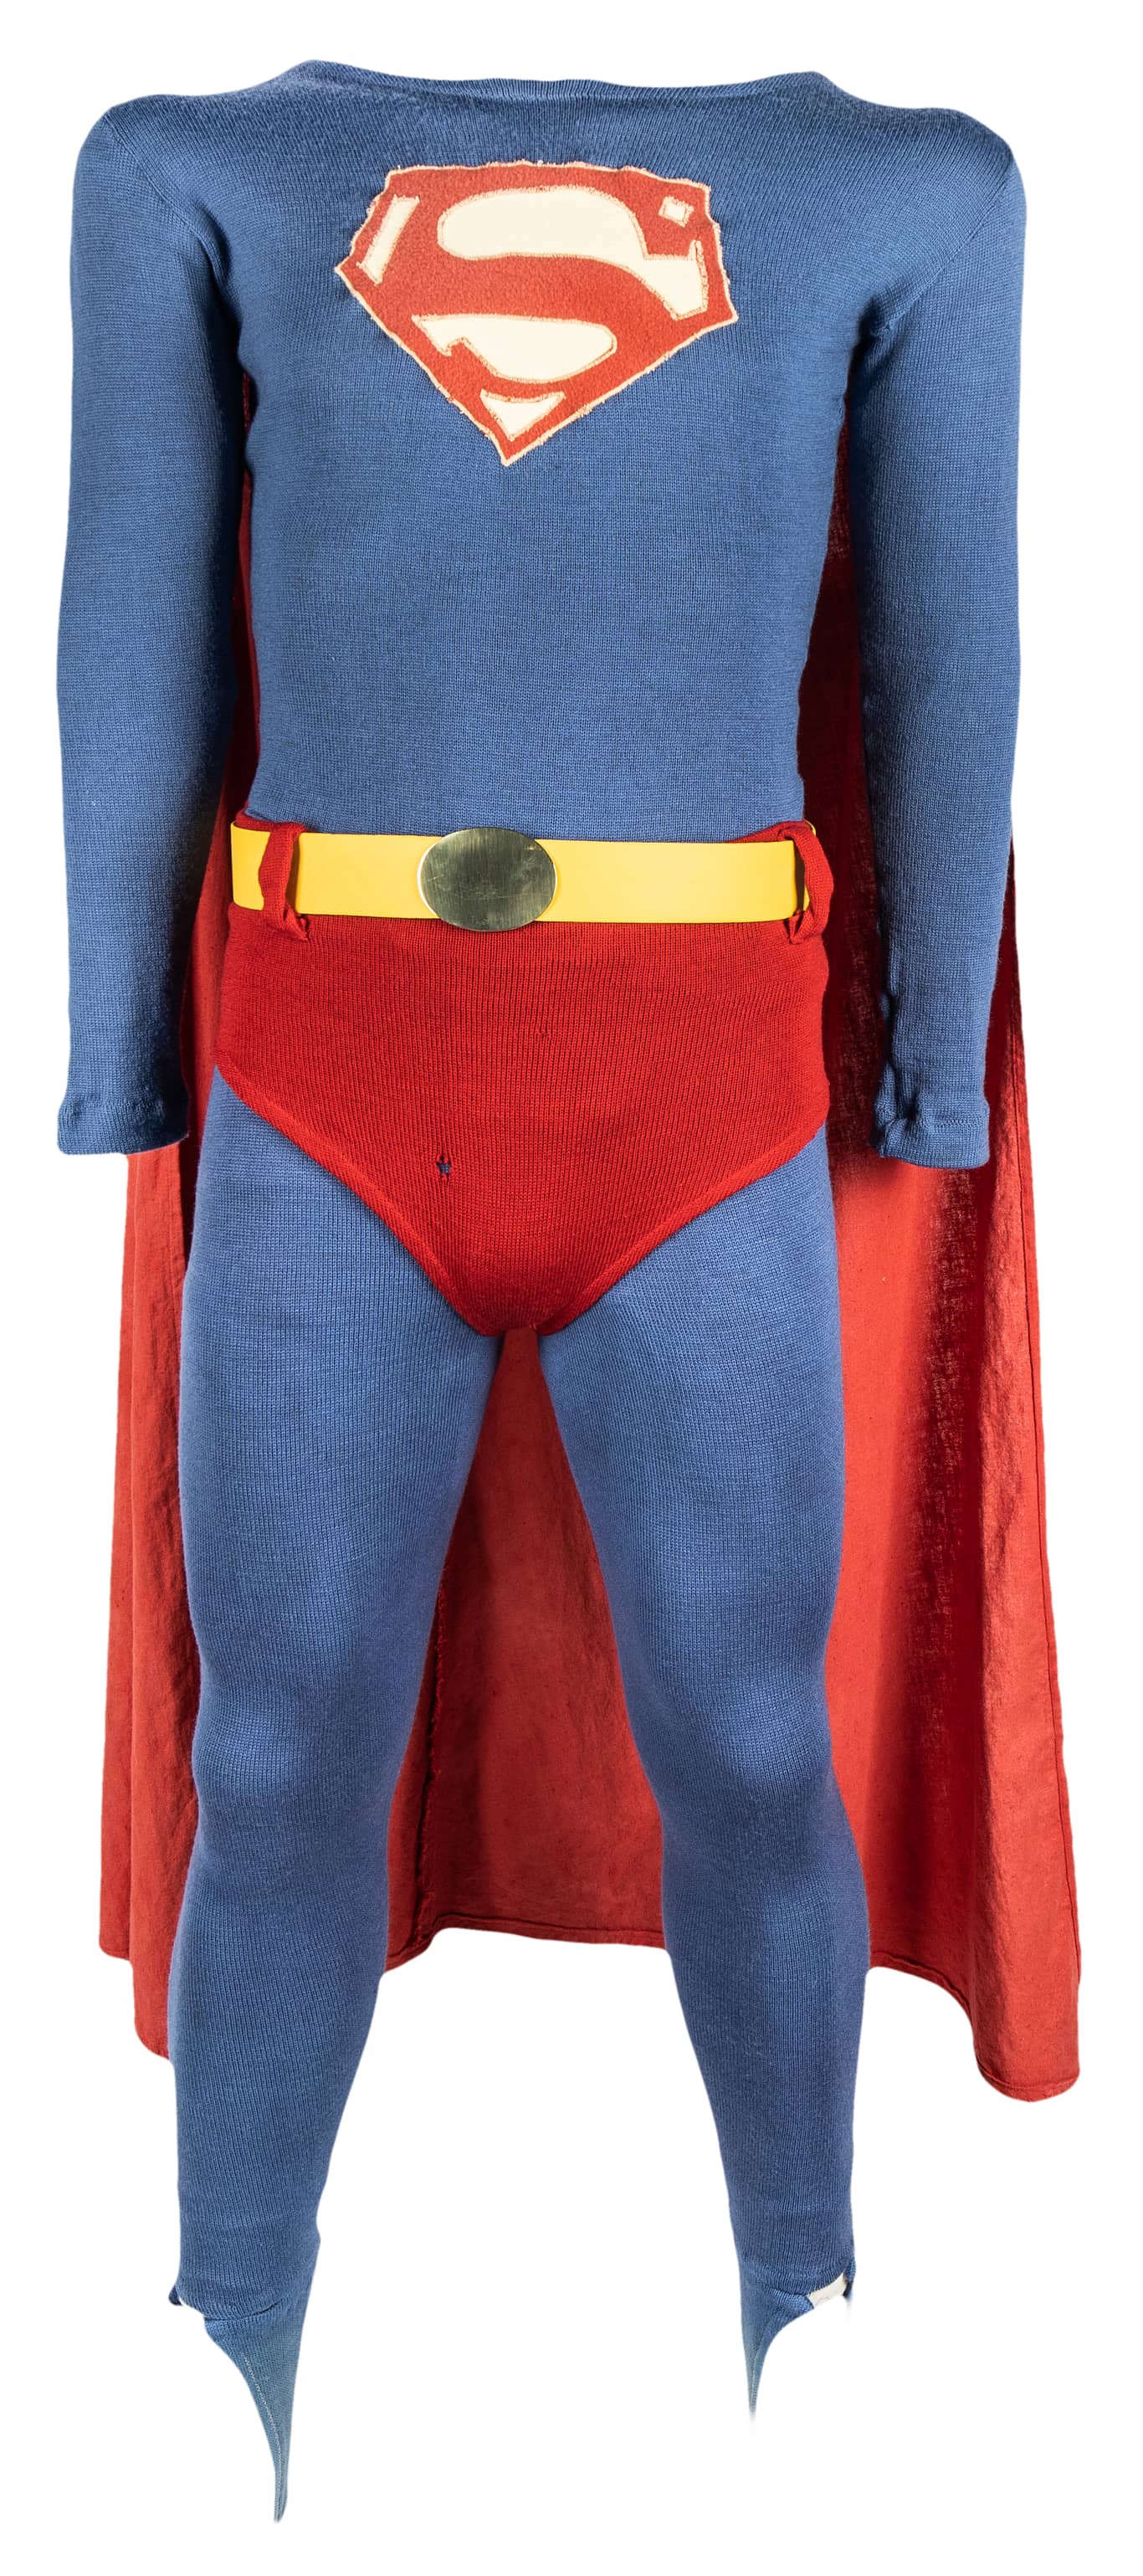 George Reeves Event-Used Superman Costume Available at Auction